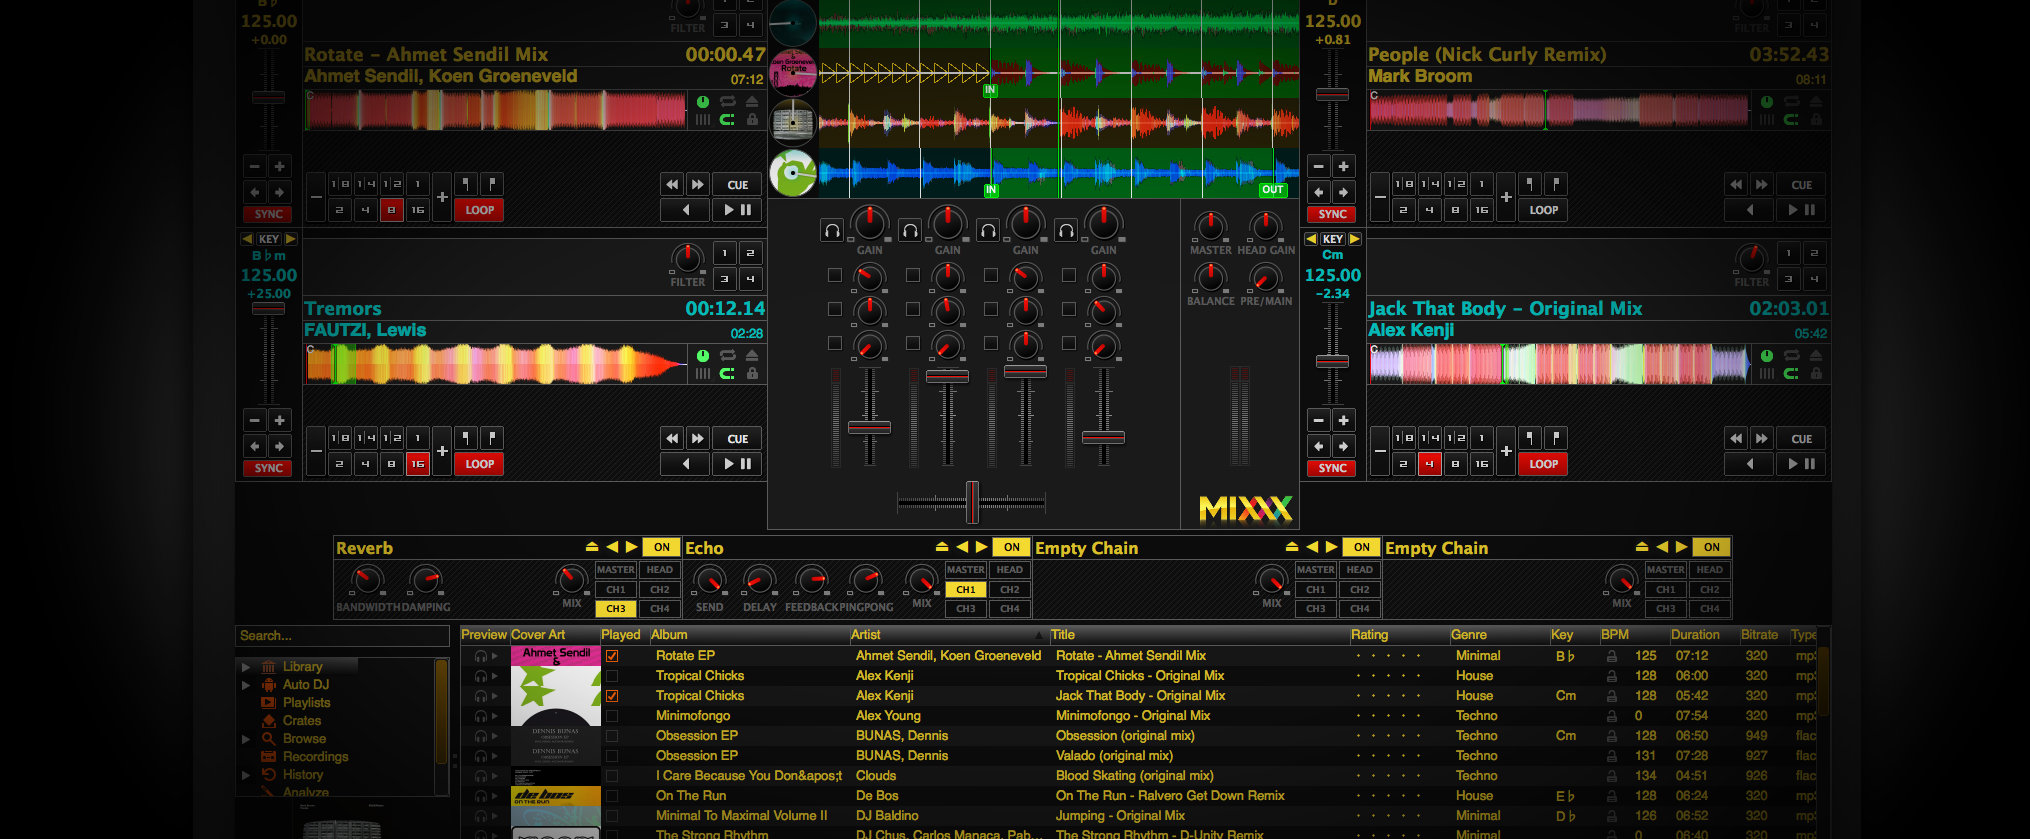 Professional DJ Music Mixing Software, Mixxx, MIDI Controller Support CD - $8.49 : The Classic Archives: Shed & Gazebo Vintage Books, Magazines, Comics on DVD, Professional Shed & Gazebo Plans,